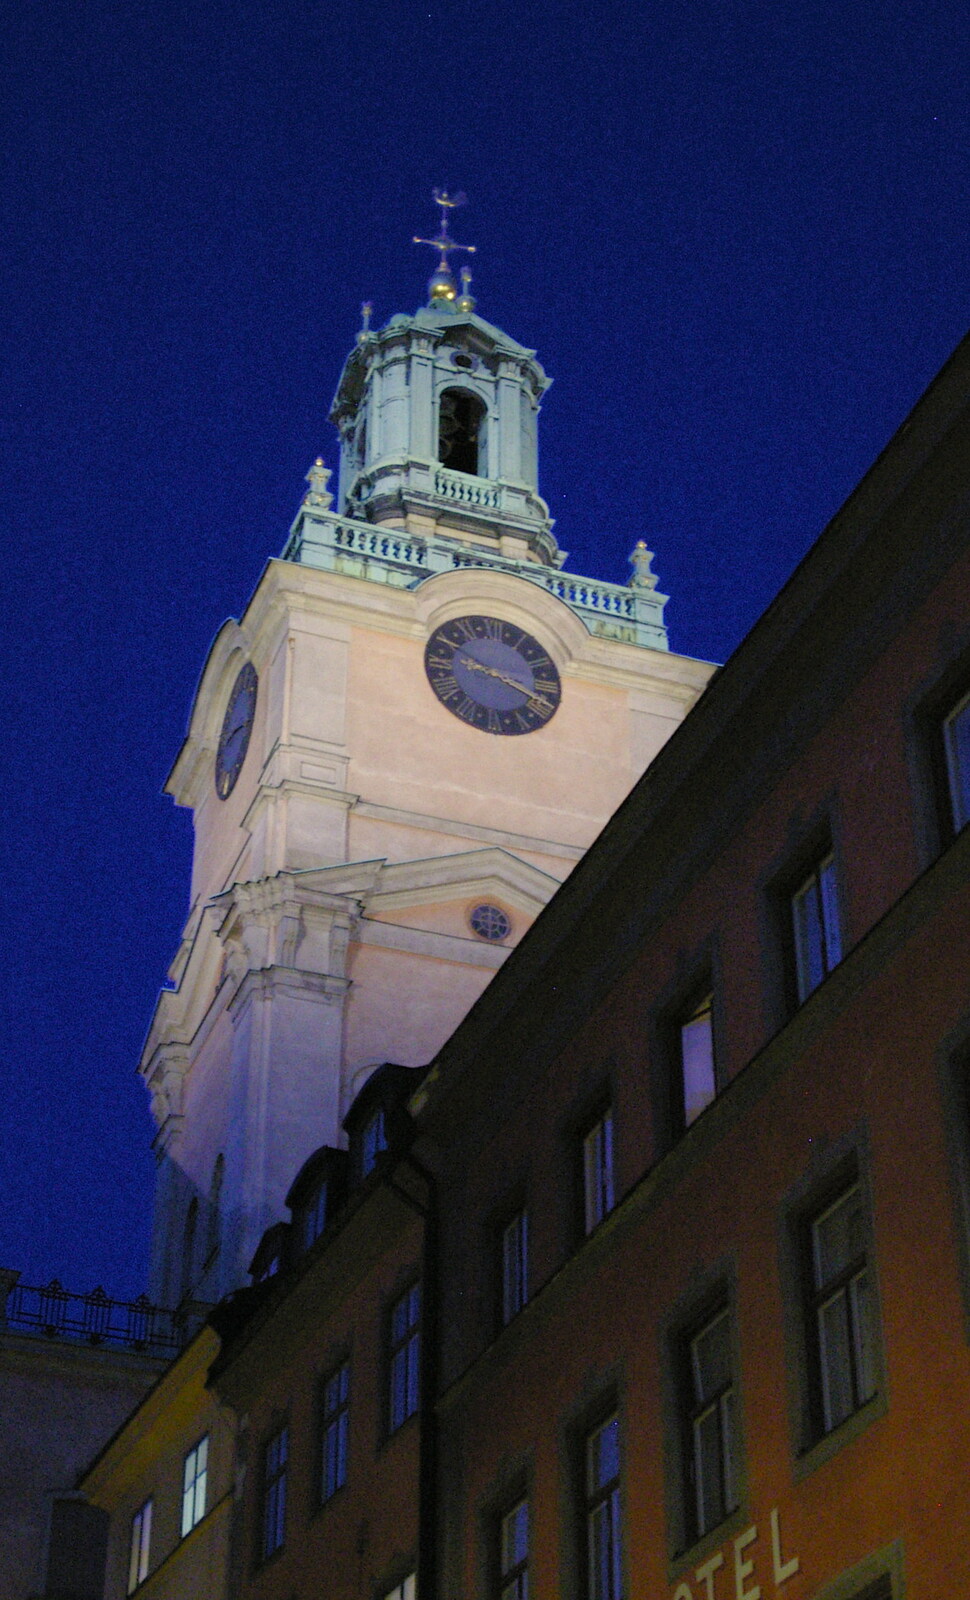 The clock tower, lit up at night from A Postcard From Stockholm: A Working Trip to Sweden - 24th April 2005